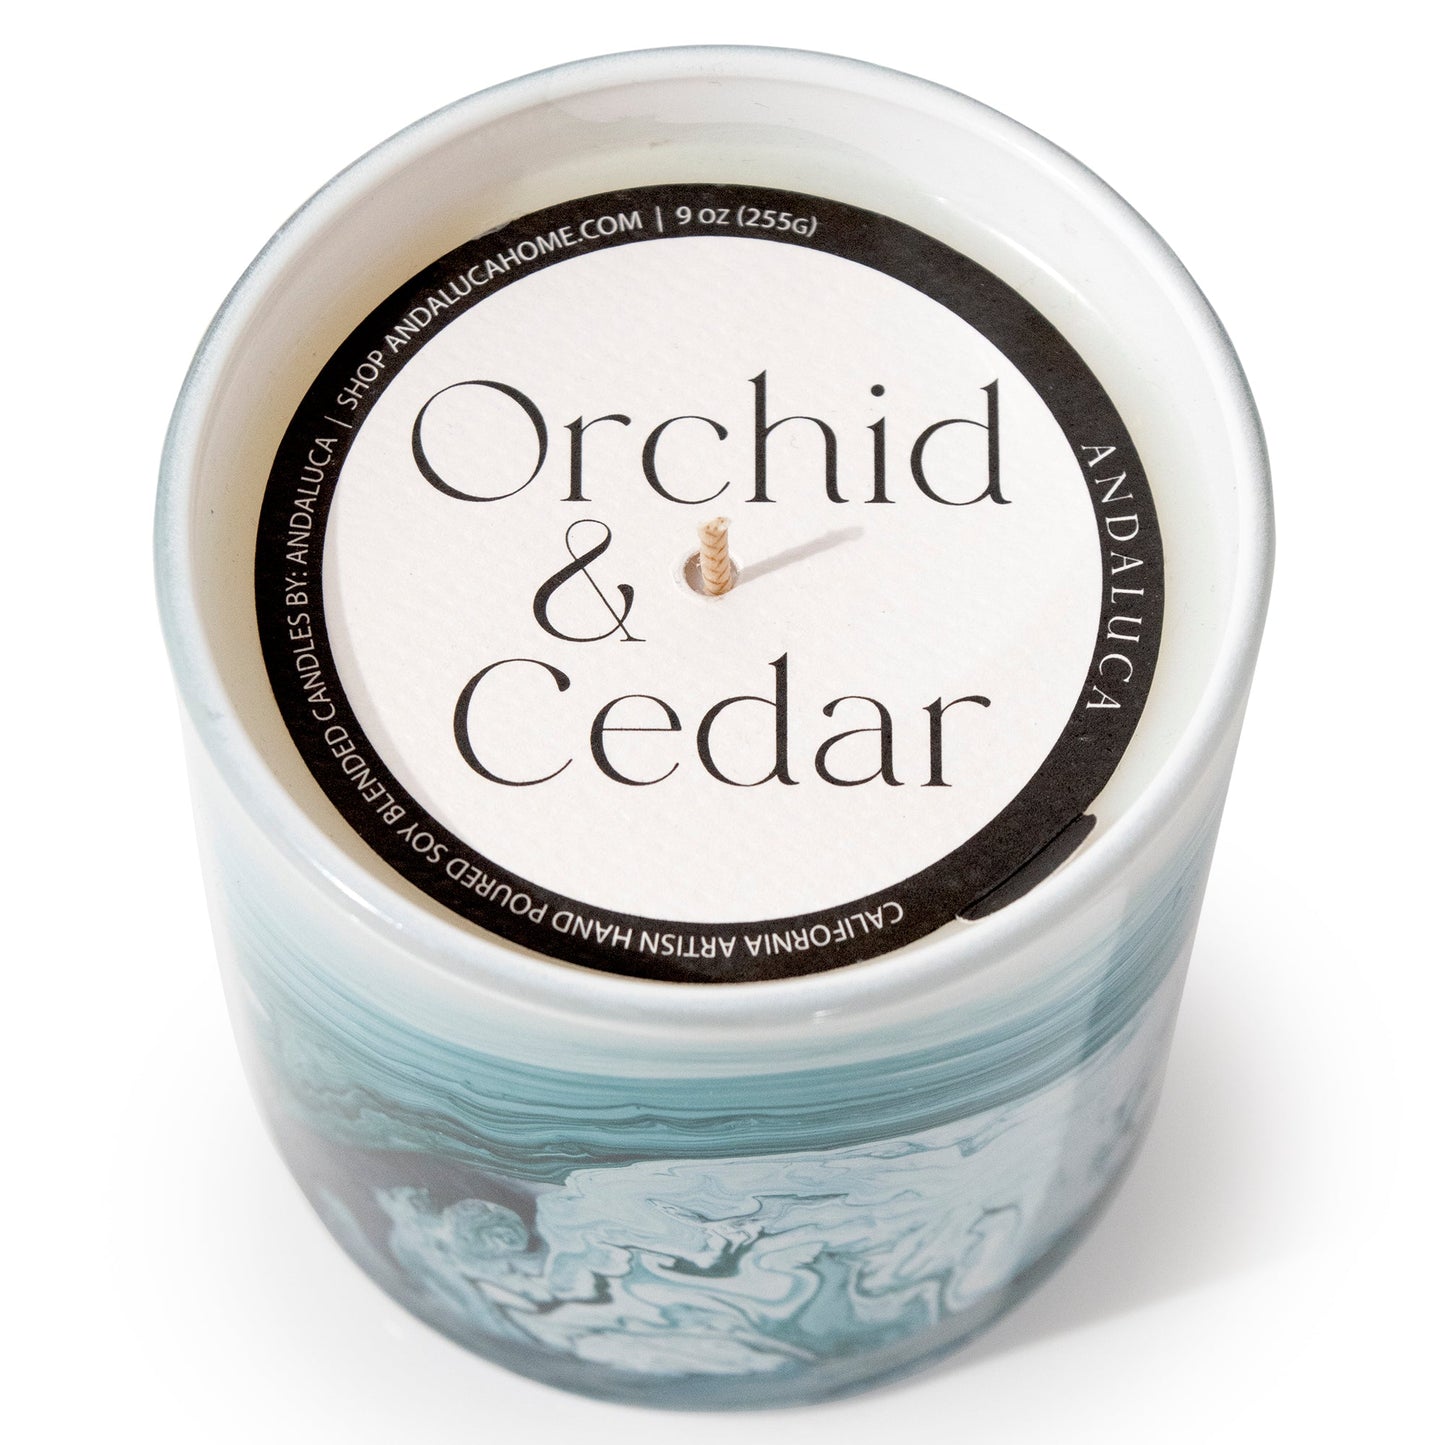 Orchid & Cedar 9 oz. Swirl Glass Candle by Andaluca Home